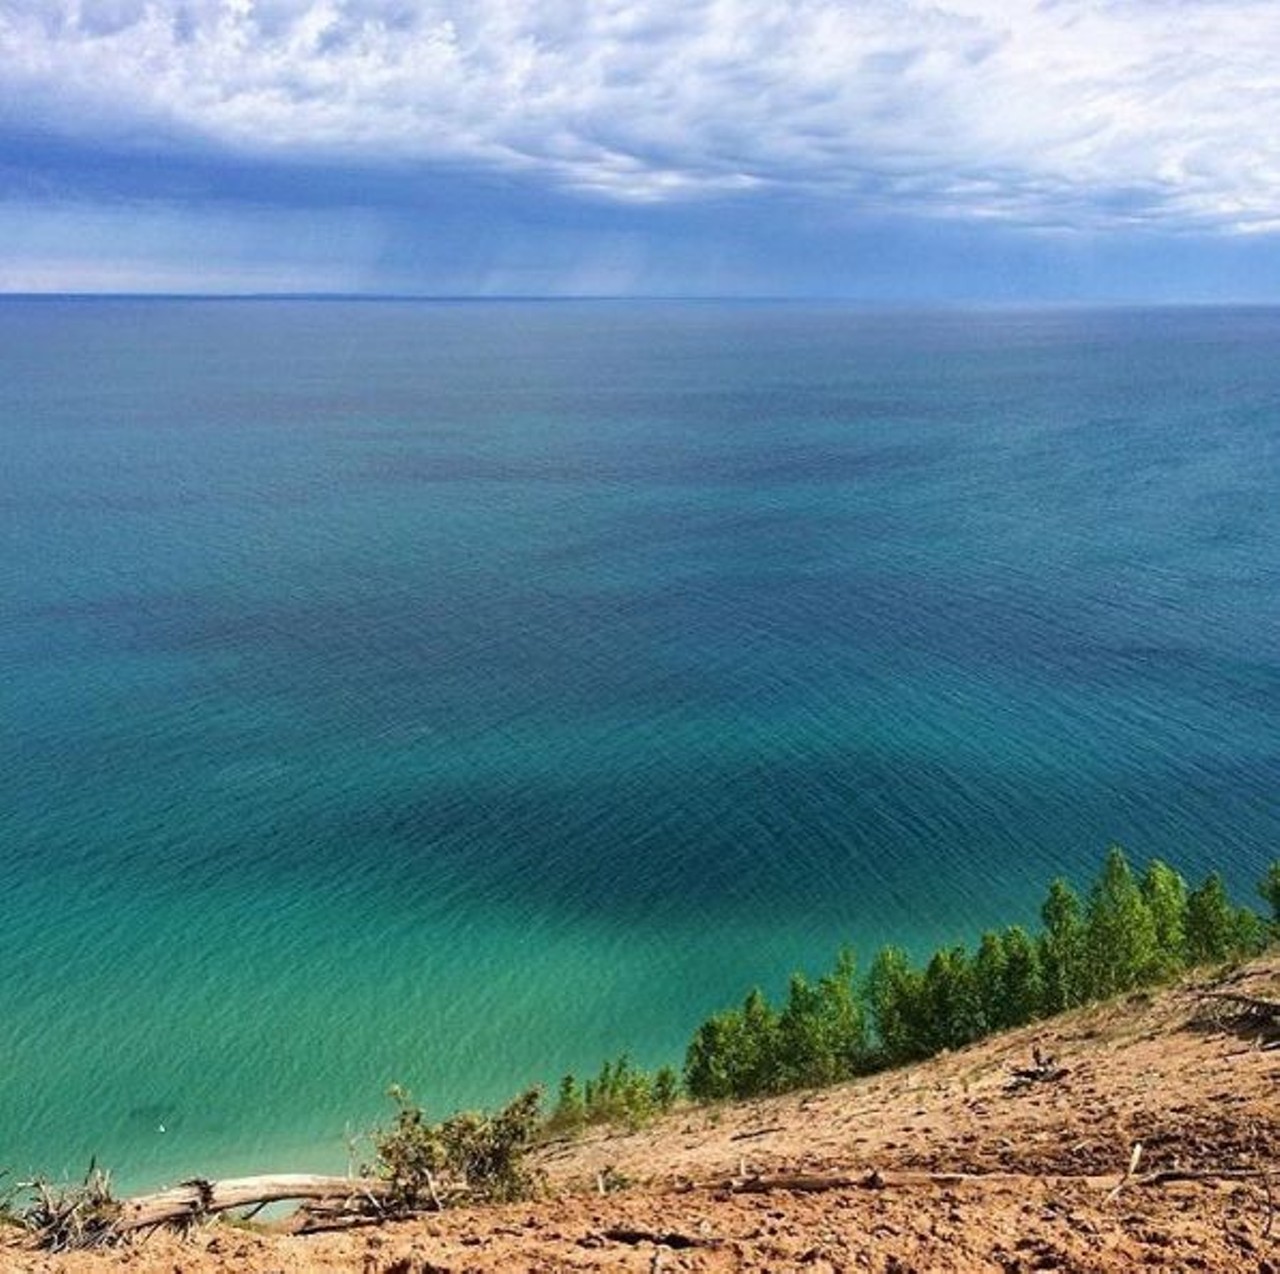 Sleeping Bear Dunes
9922 Front St., Empire; 231-326-4700
The park offers visitors access to forests, dune formations, beaches, and wildlife. It is a perfect family hangout with climbing, swimming, trail walking, a 1871 lighthouse, and historic farms available for sightseeing.
Photo via Instagram, @puremittigan